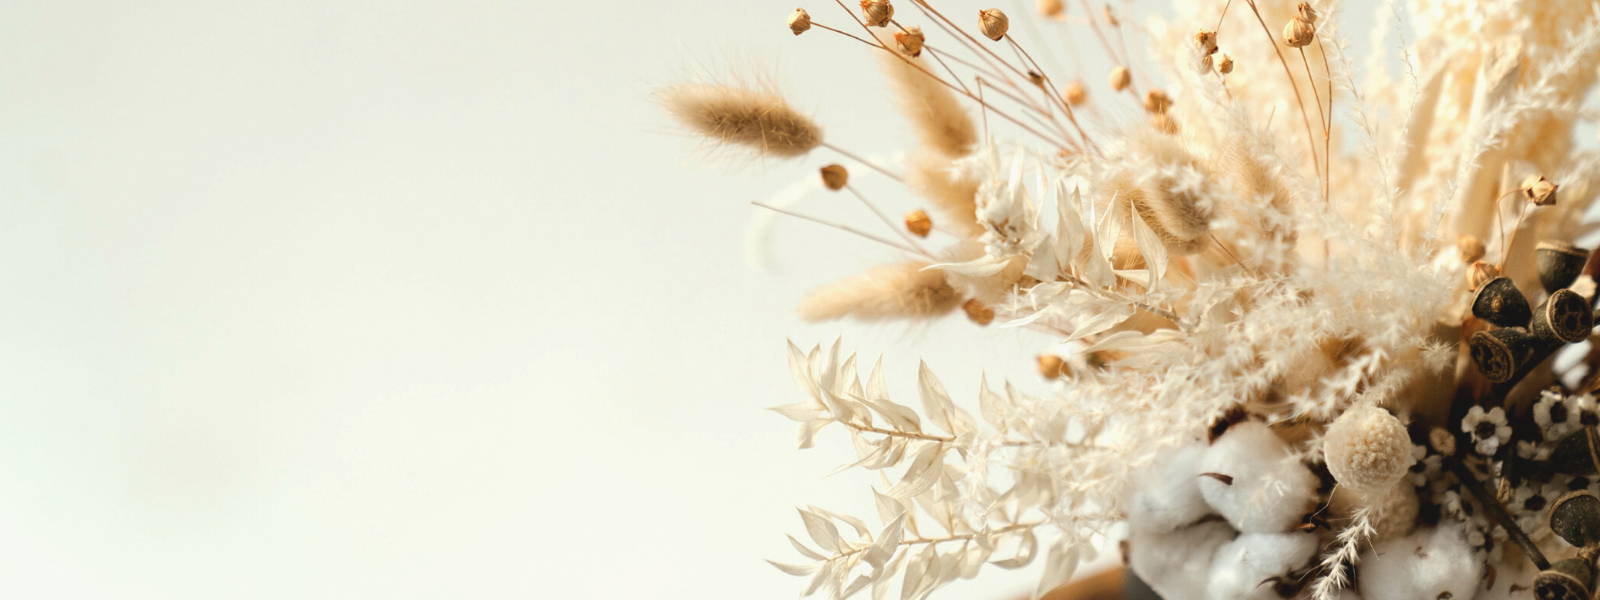 Shop Dried Flowers online or instore from our Dried Flower Bar. By Newcastle Dried Fower Co, Cardiff NSW